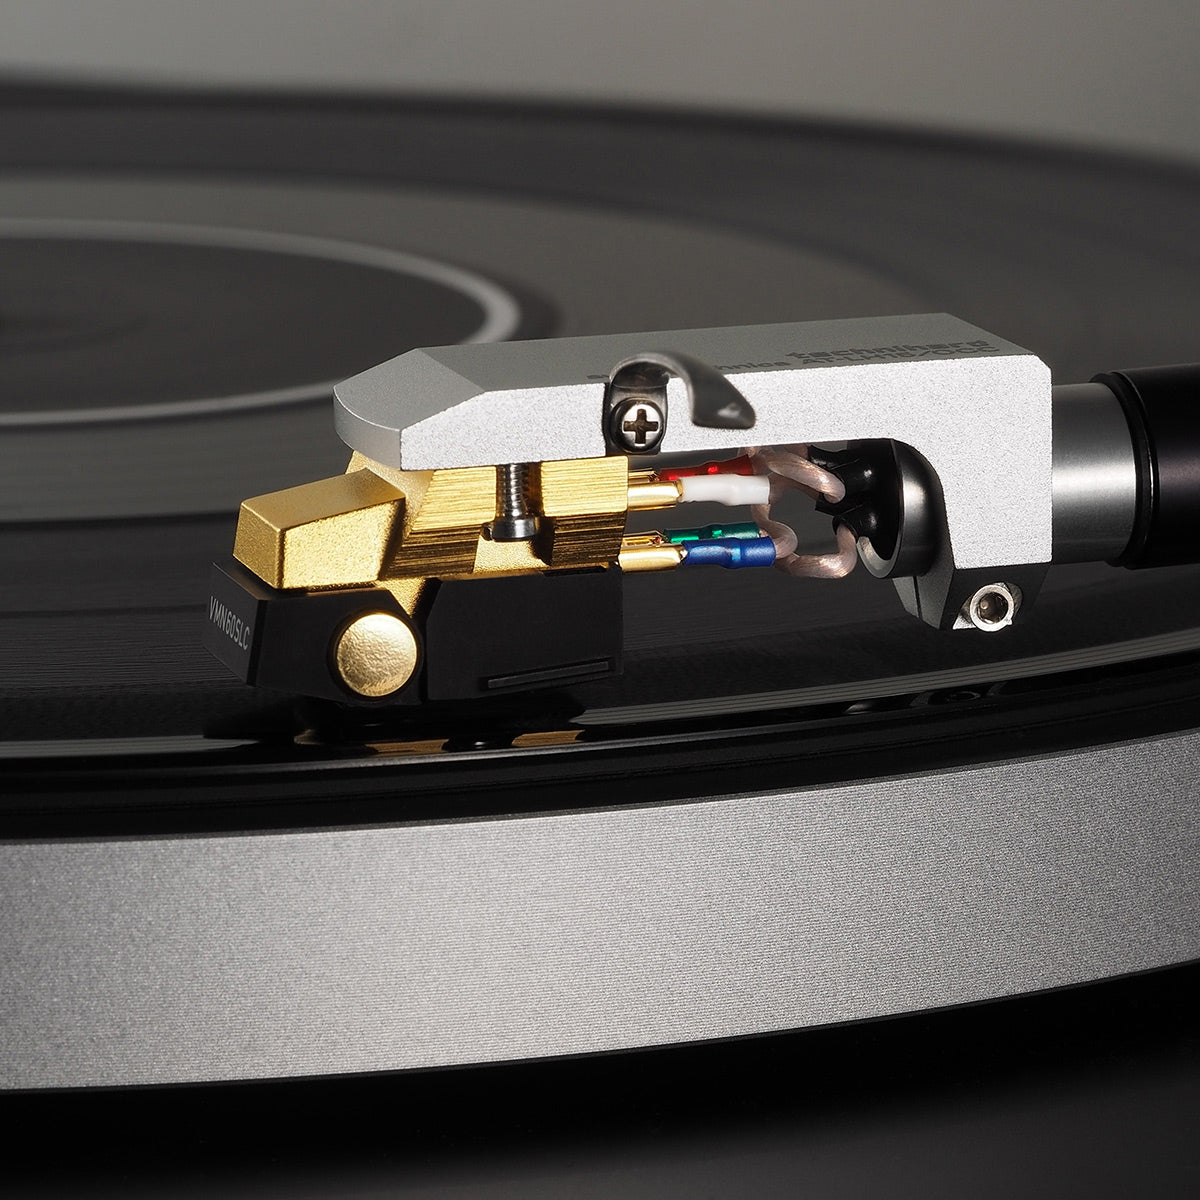 Audio-Technica AT6108 Cartridge to Headshell Color-Coded Lead Wires with AT615a Turntable Level